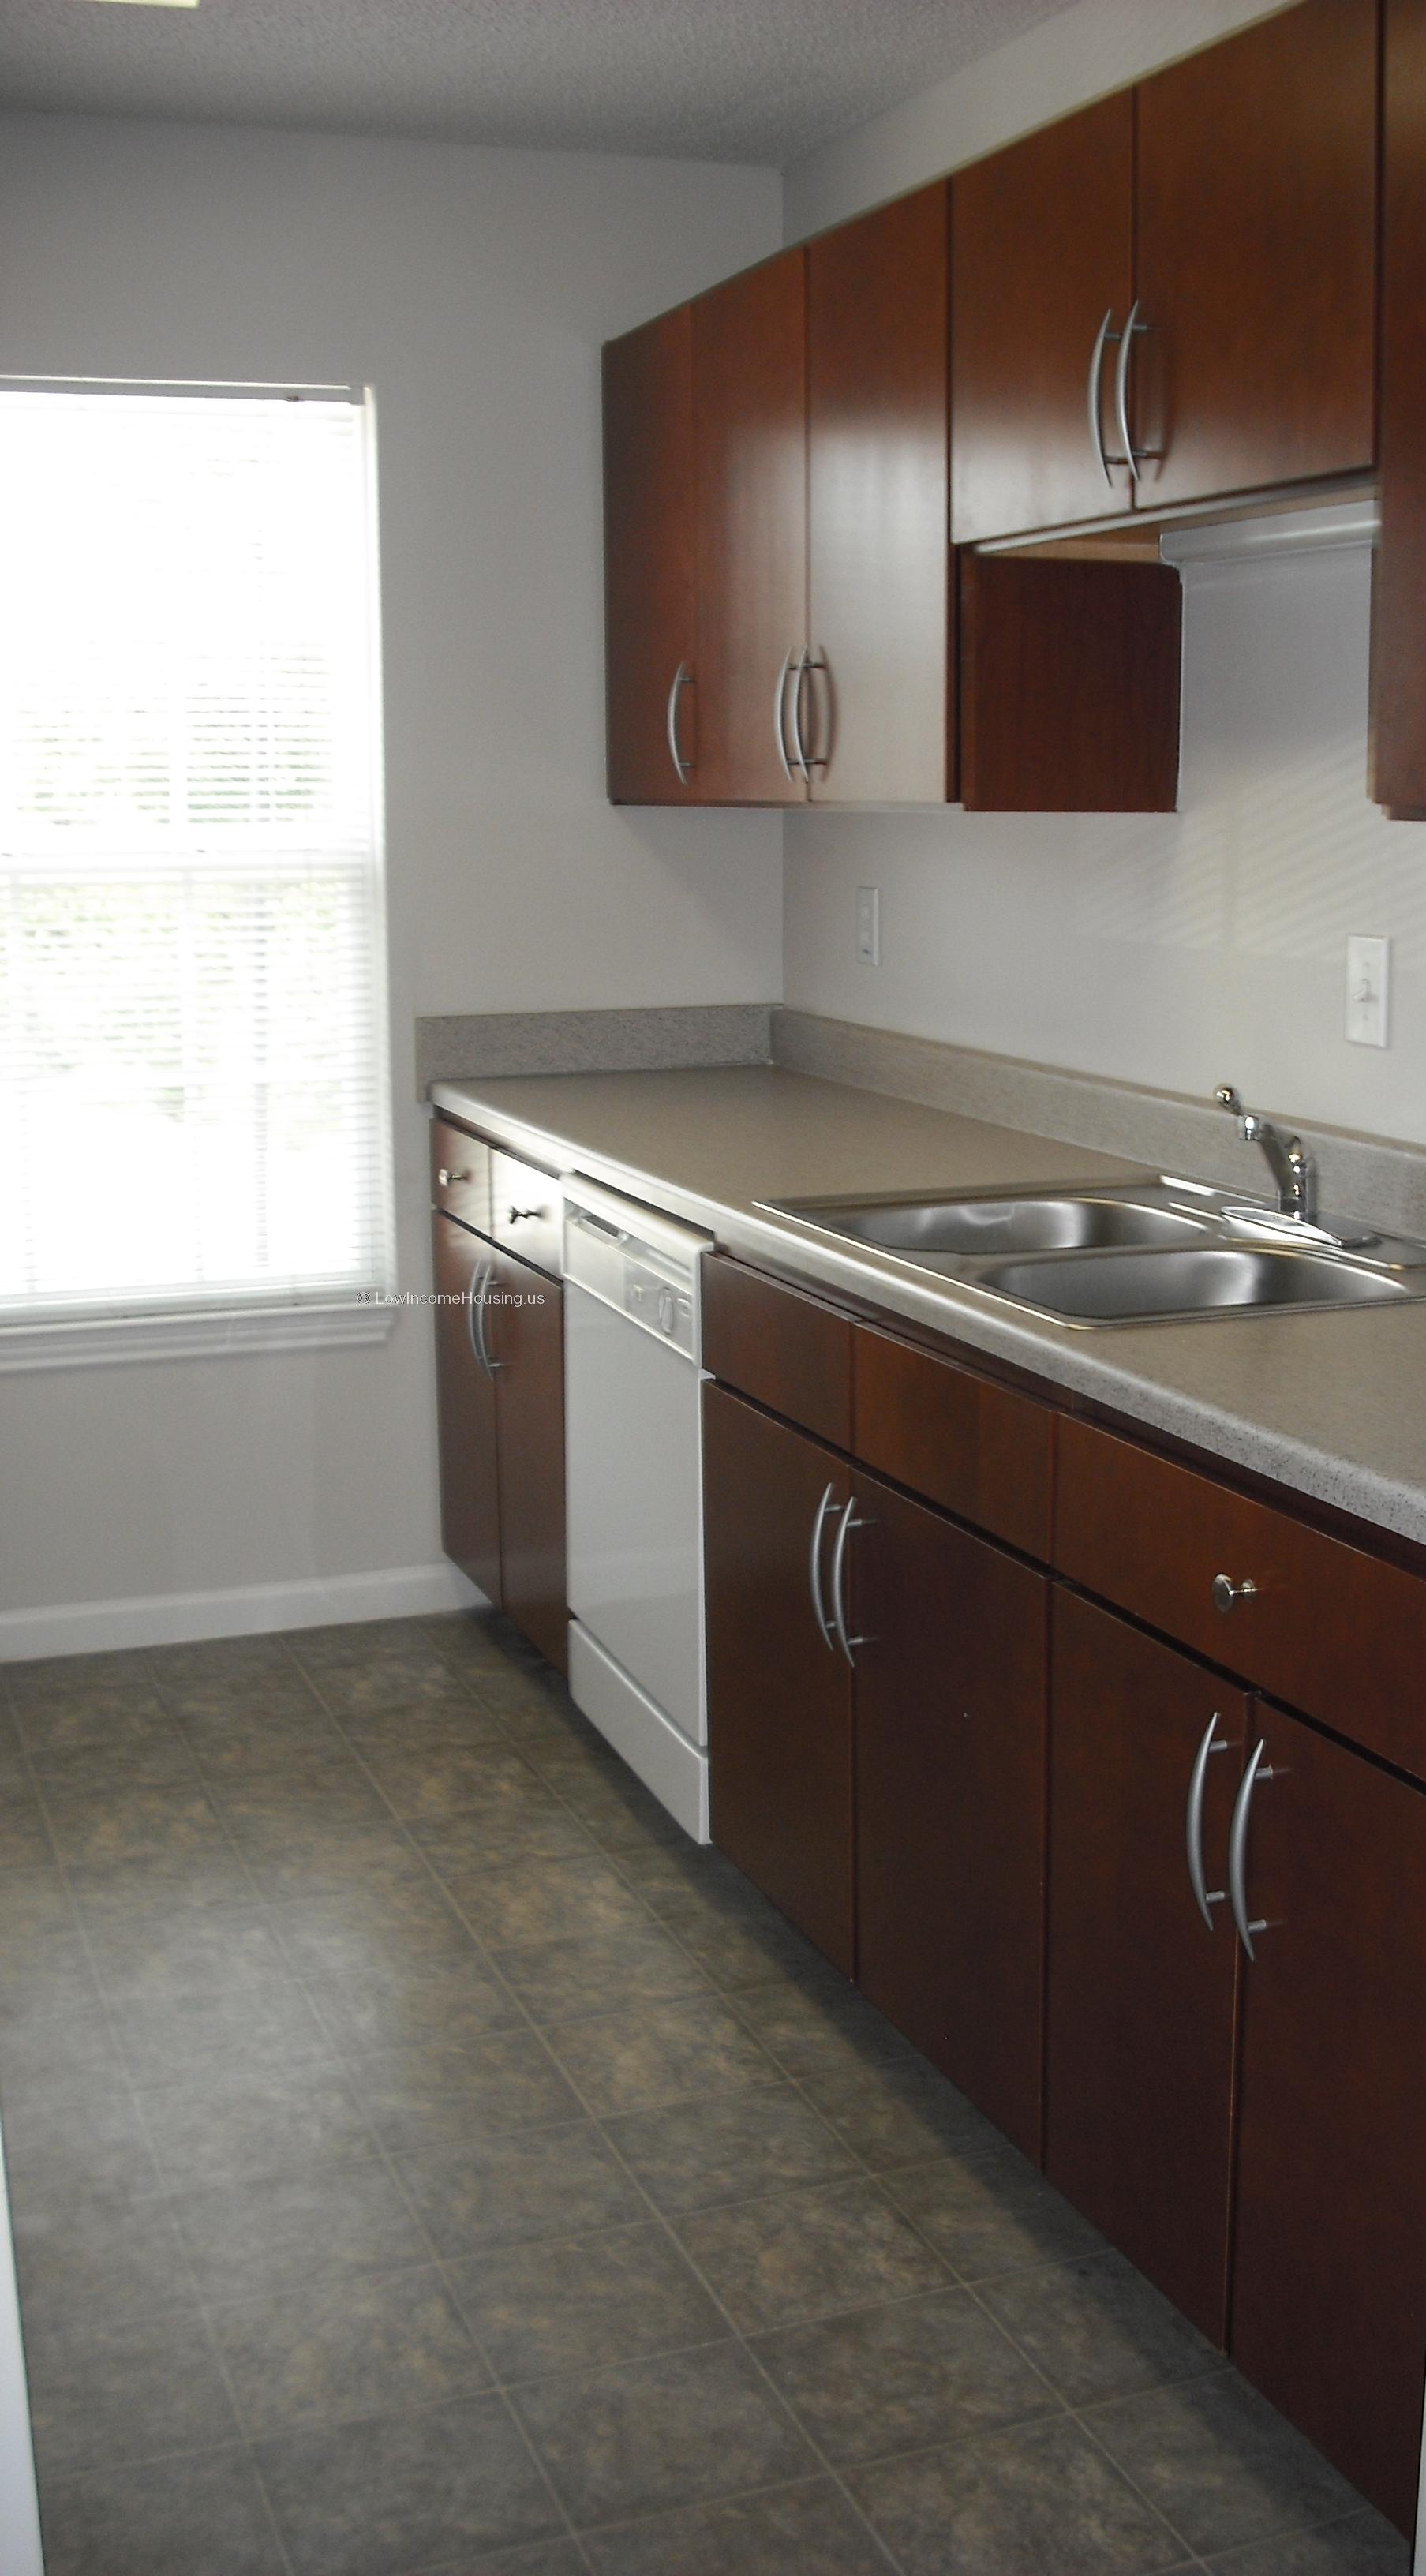 Interior of kitchen unit with dishwasher installed, dual basin sinks and large picture window.